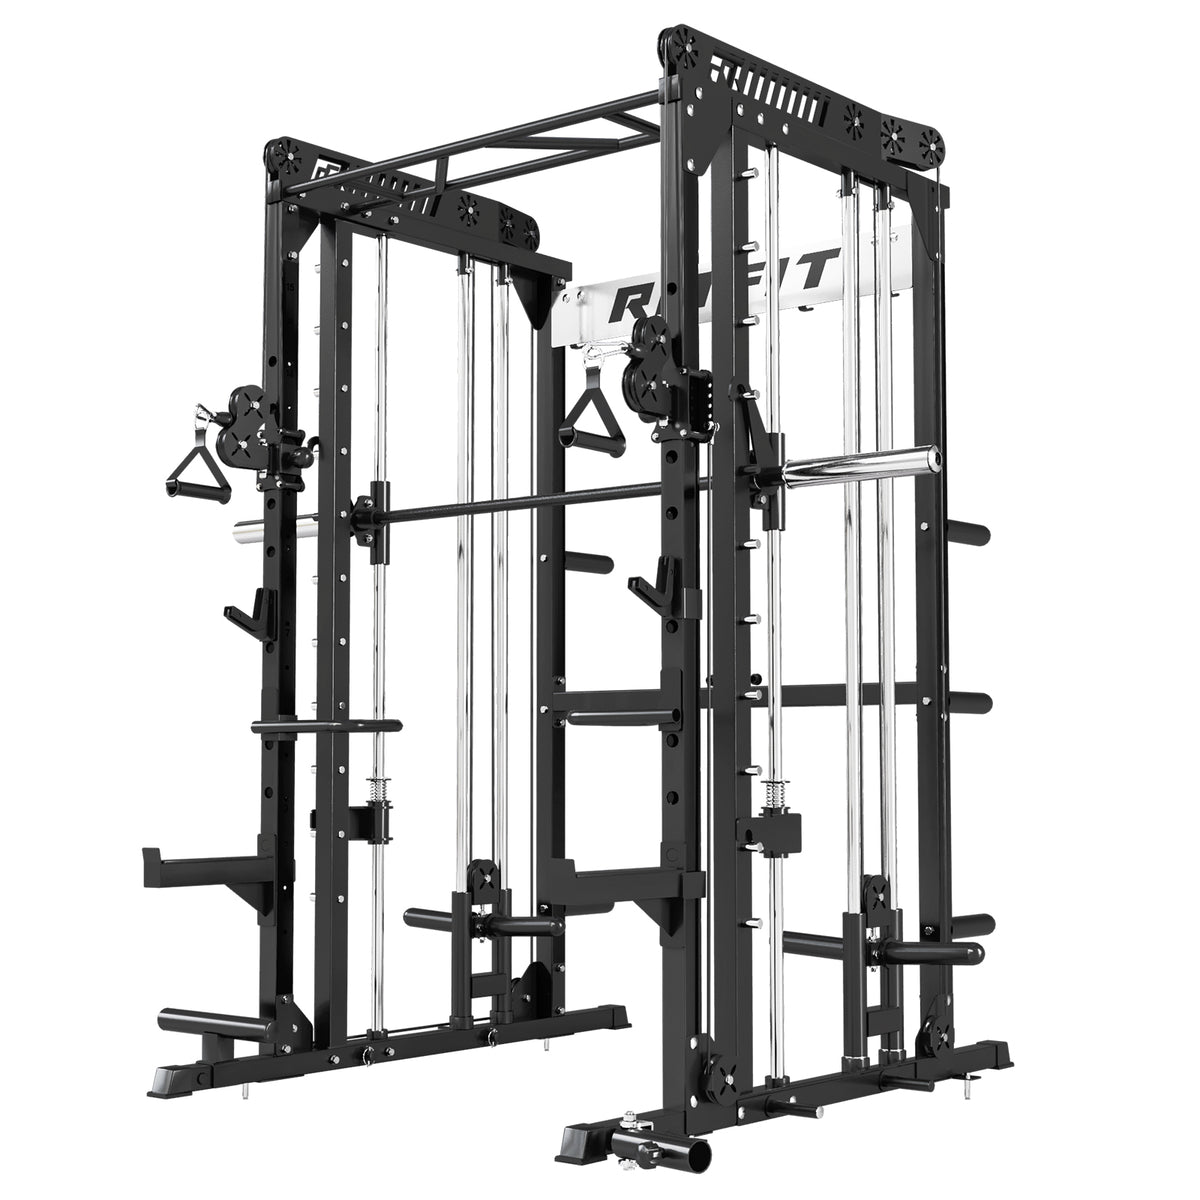 RitFit M1 Multi-functional Smith Machine for Beginners and Pros